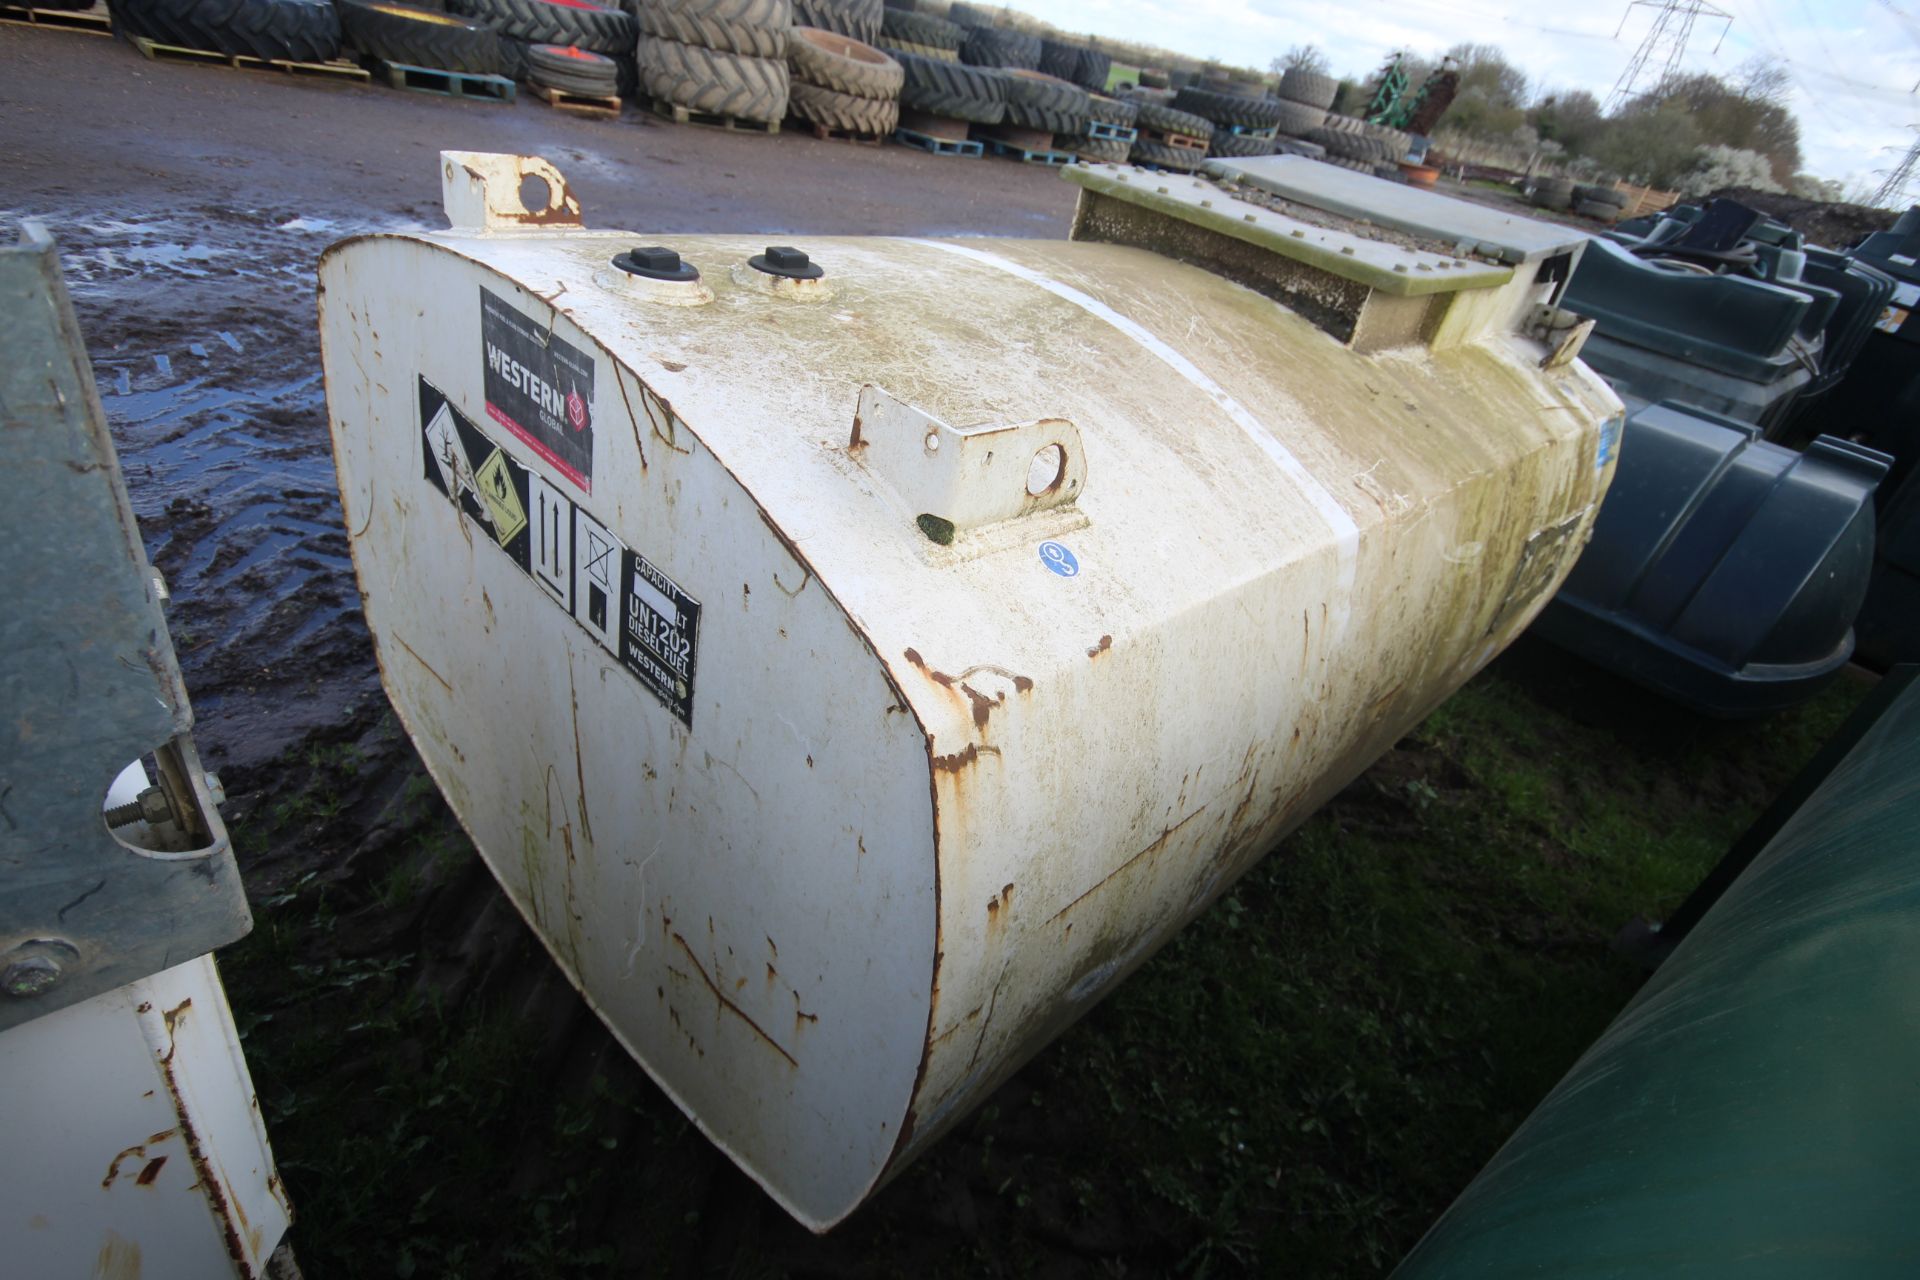 Western Abbi 1,940L bunded steel site fuel tank. With manual pump. For sale on behalf of the - Image 3 of 8